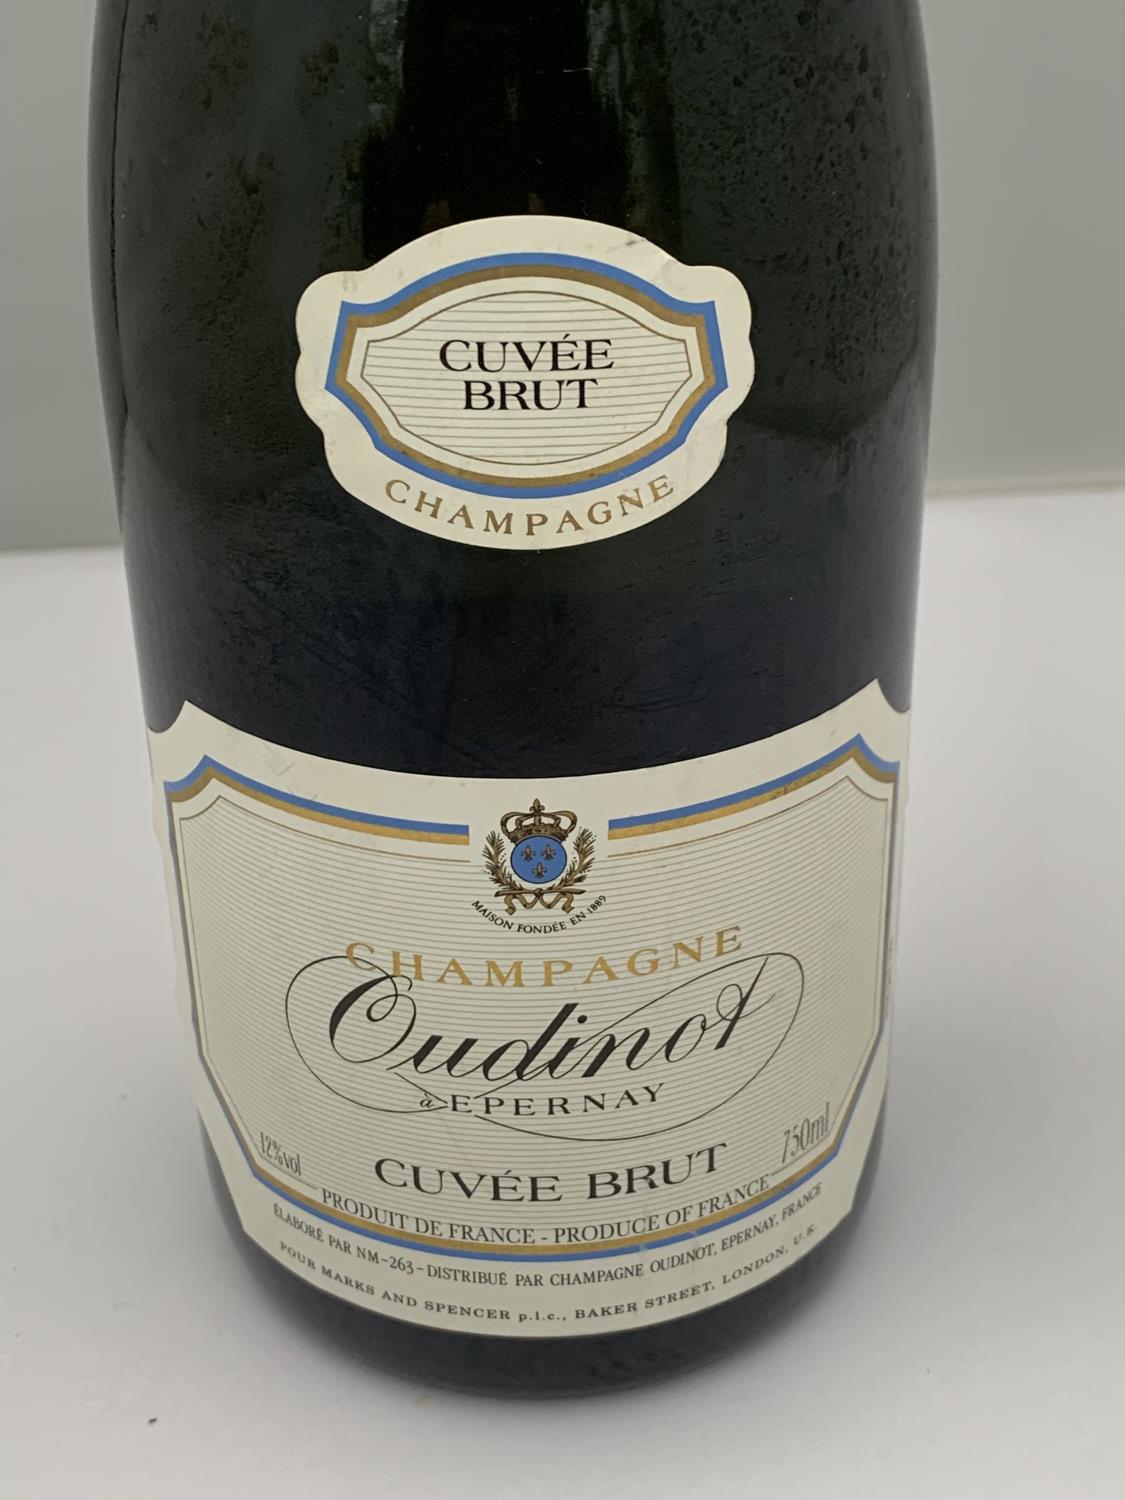 A BOTTLE OF OUDINOT EPERNAY CUVEE BRUT CHAMPAGNE - Image 2 of 3